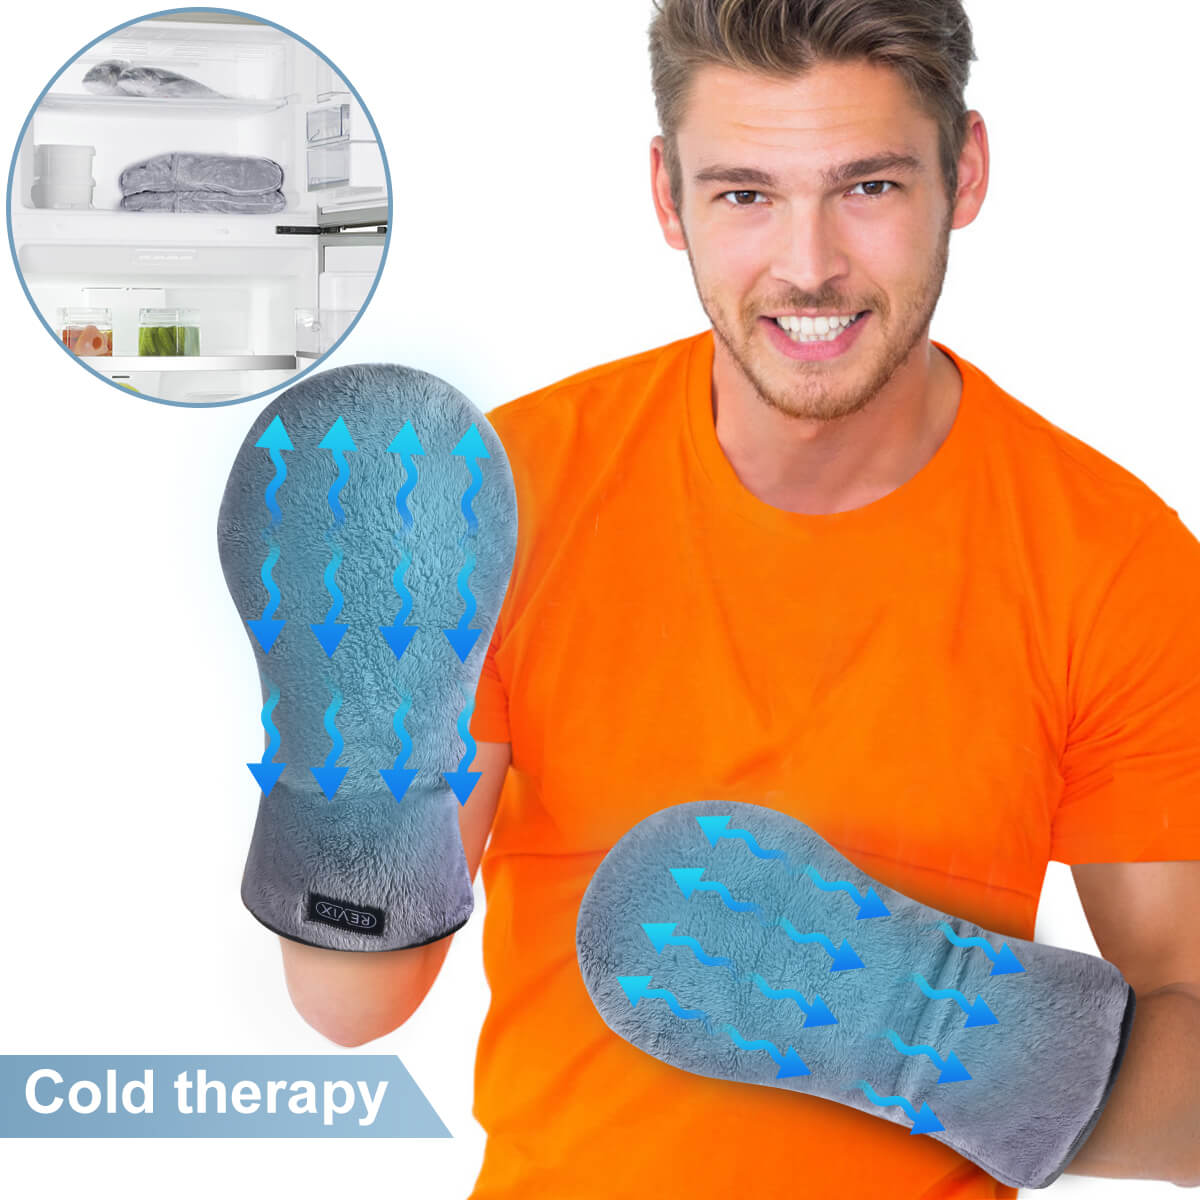 REVIX Heated Mitts for Arthritis and Hand Therapy, Microwavable Hand Warmer Gloves for Women and Men in Cases of Stiff Joints, Trigger Finger or